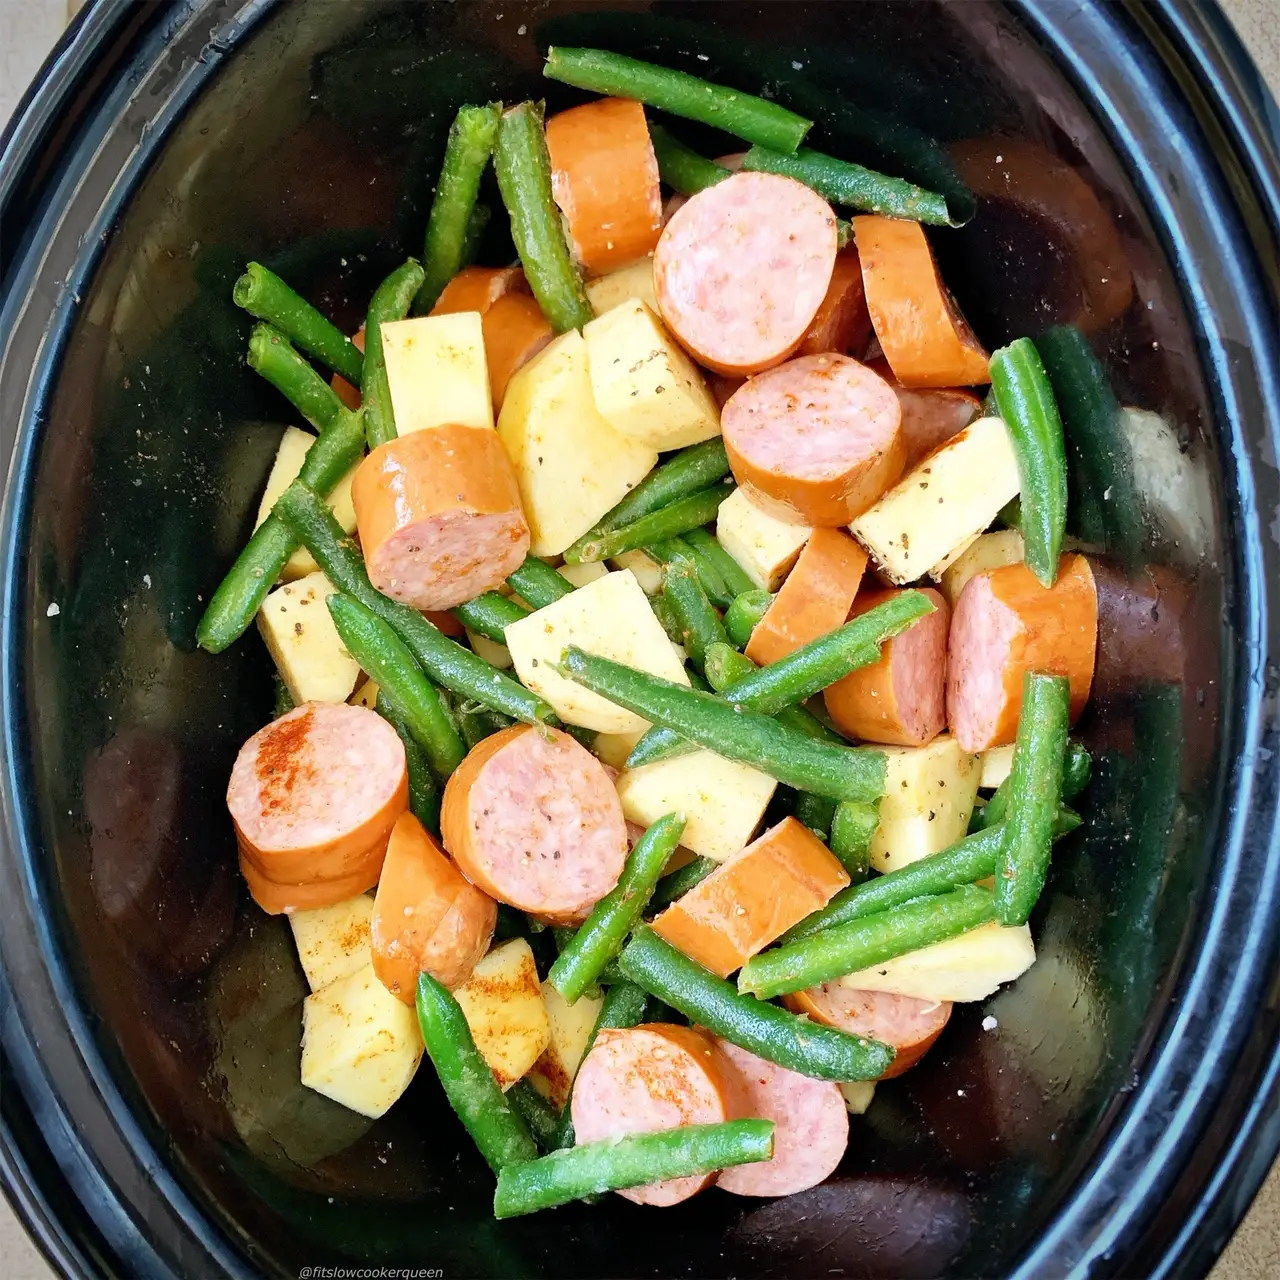 Sausage, potatoes, and green beans cook together in this simple slow ...